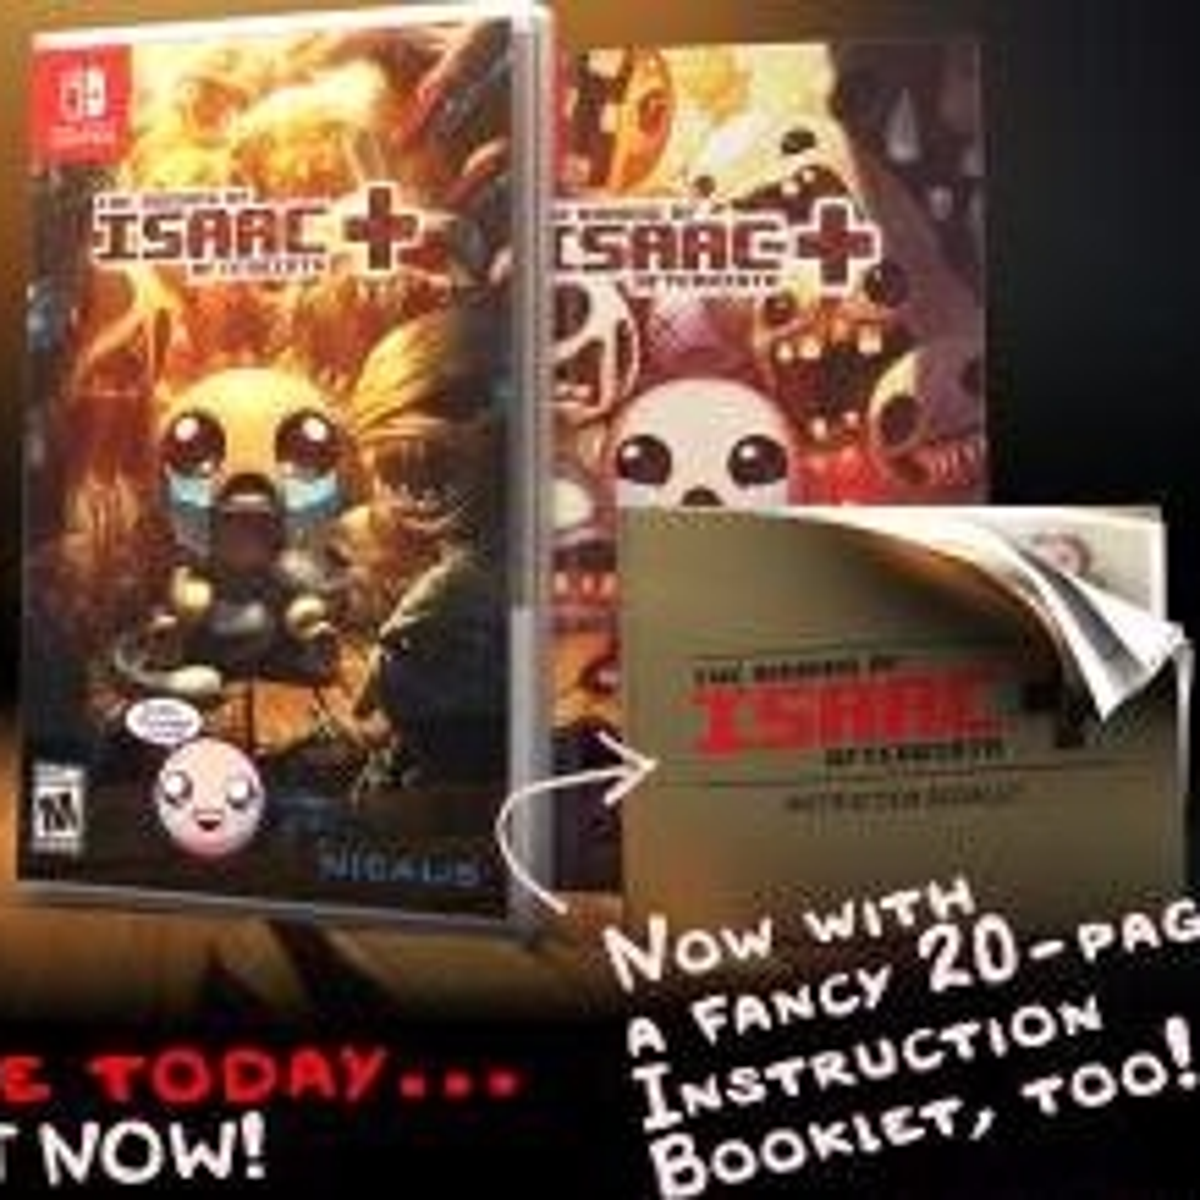 The Binding of Isaac: Afterbirth+ will no longer be a Switch launch title